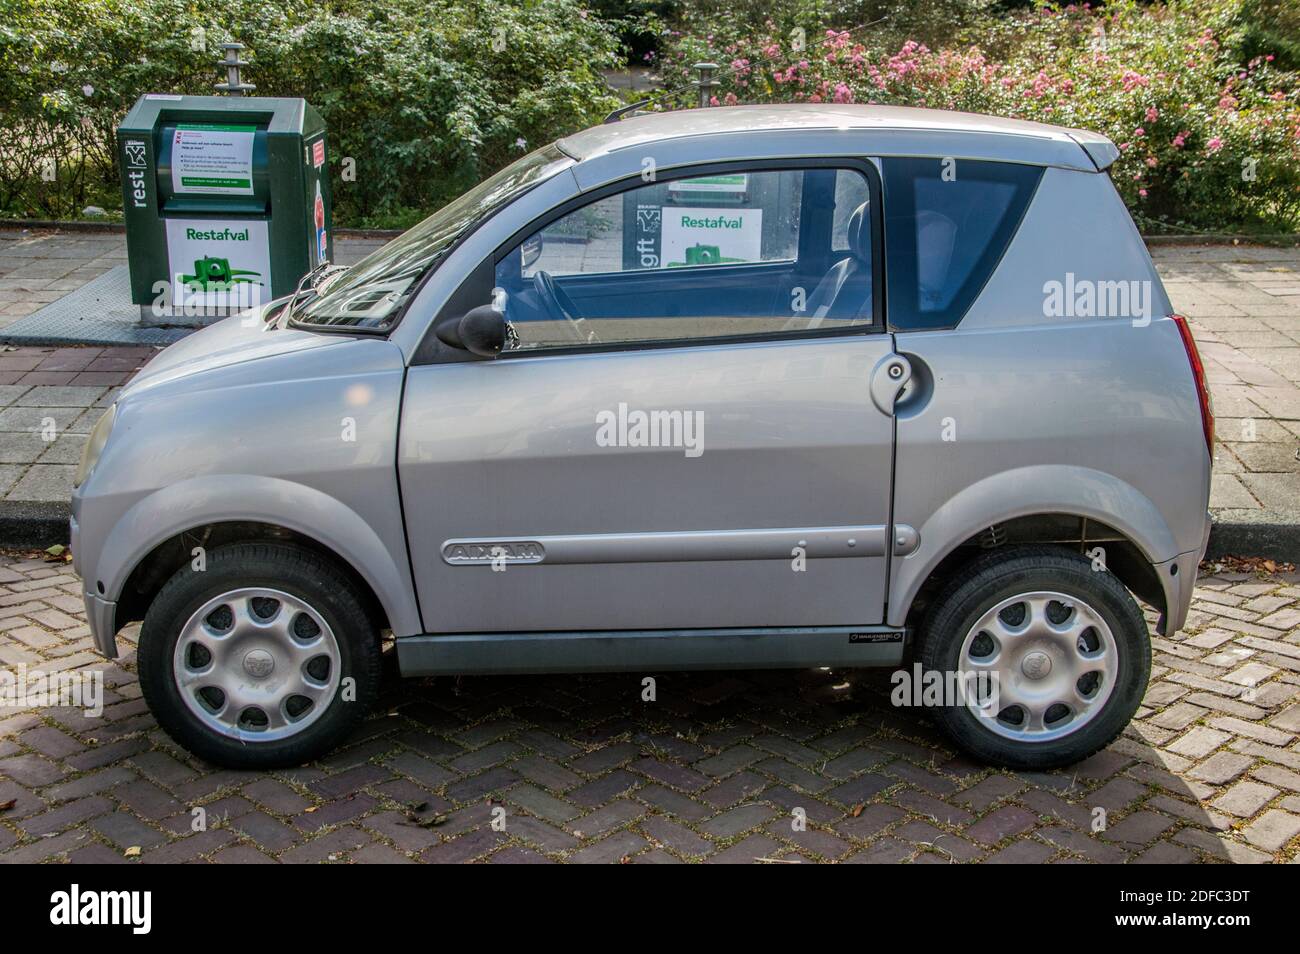 AIXM A.721 Car In The Street At Amsterdam The Netherlands 2018 Stock Photo